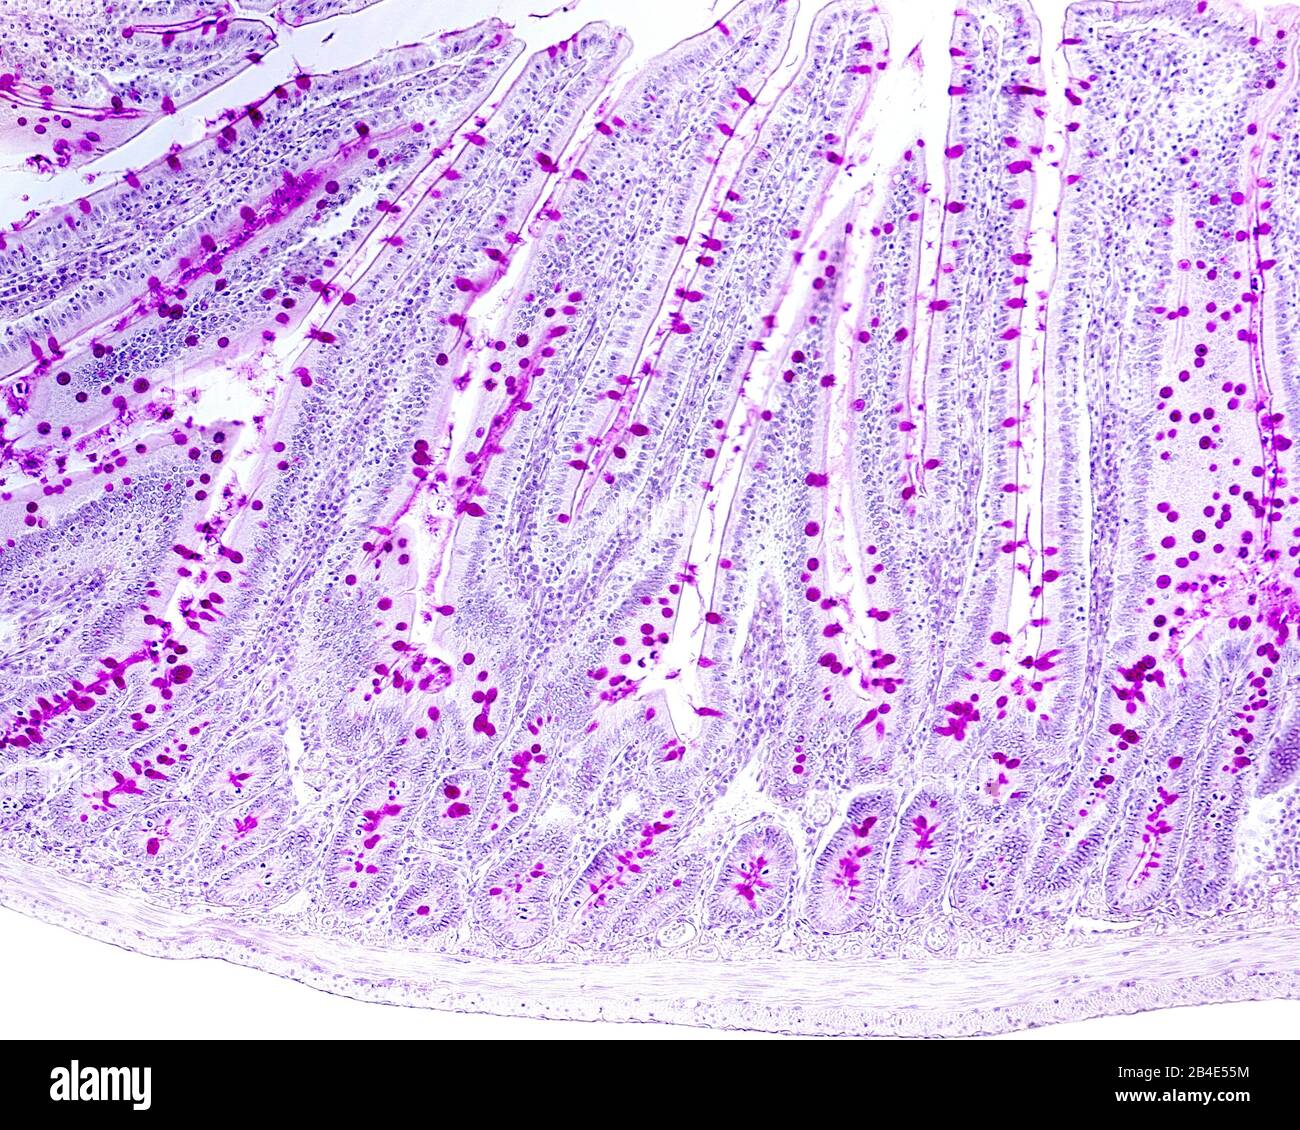 Light micrograph of goblet cells stained with the PAS technique. They are located in the epithelium lining the villi of the small intestine. The stria Stock Photo